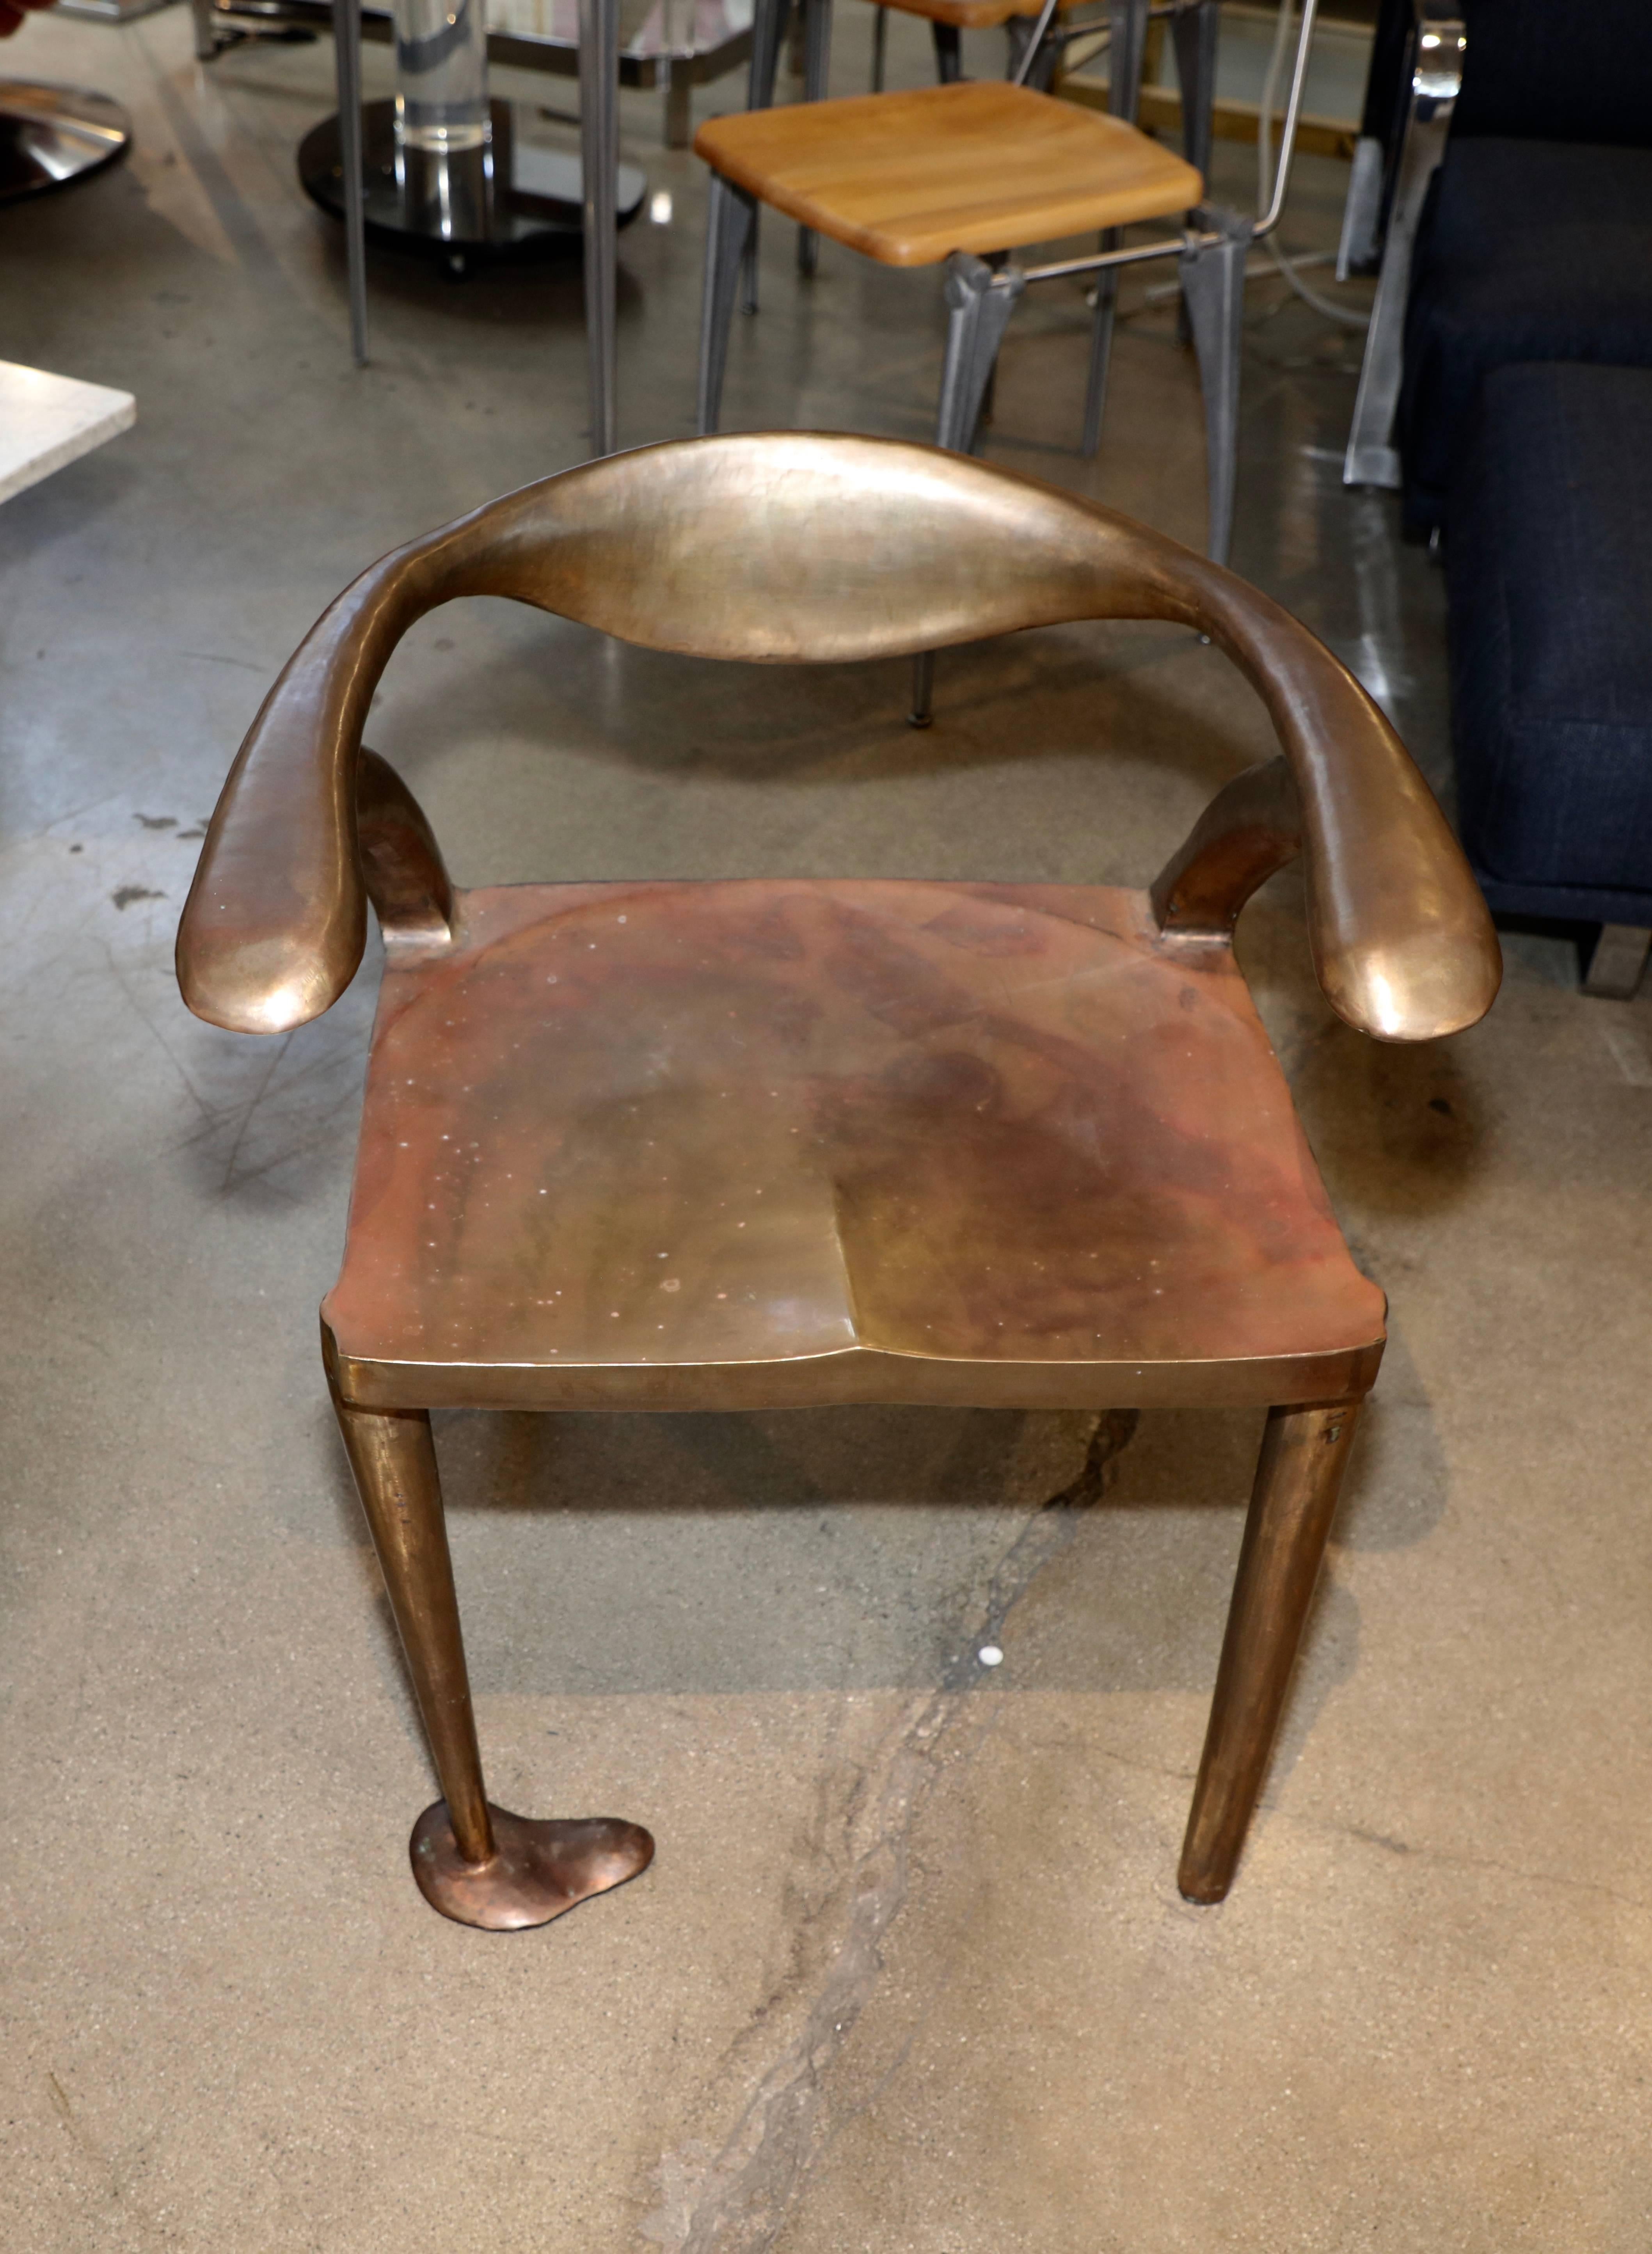 A really unique handmade chair in bronze or brass. It is not signed but is quite wonderfully made. There are seams where the metal has been welded, but the piece its well made and quite comfortable. There are marks and a crack on one leg which does